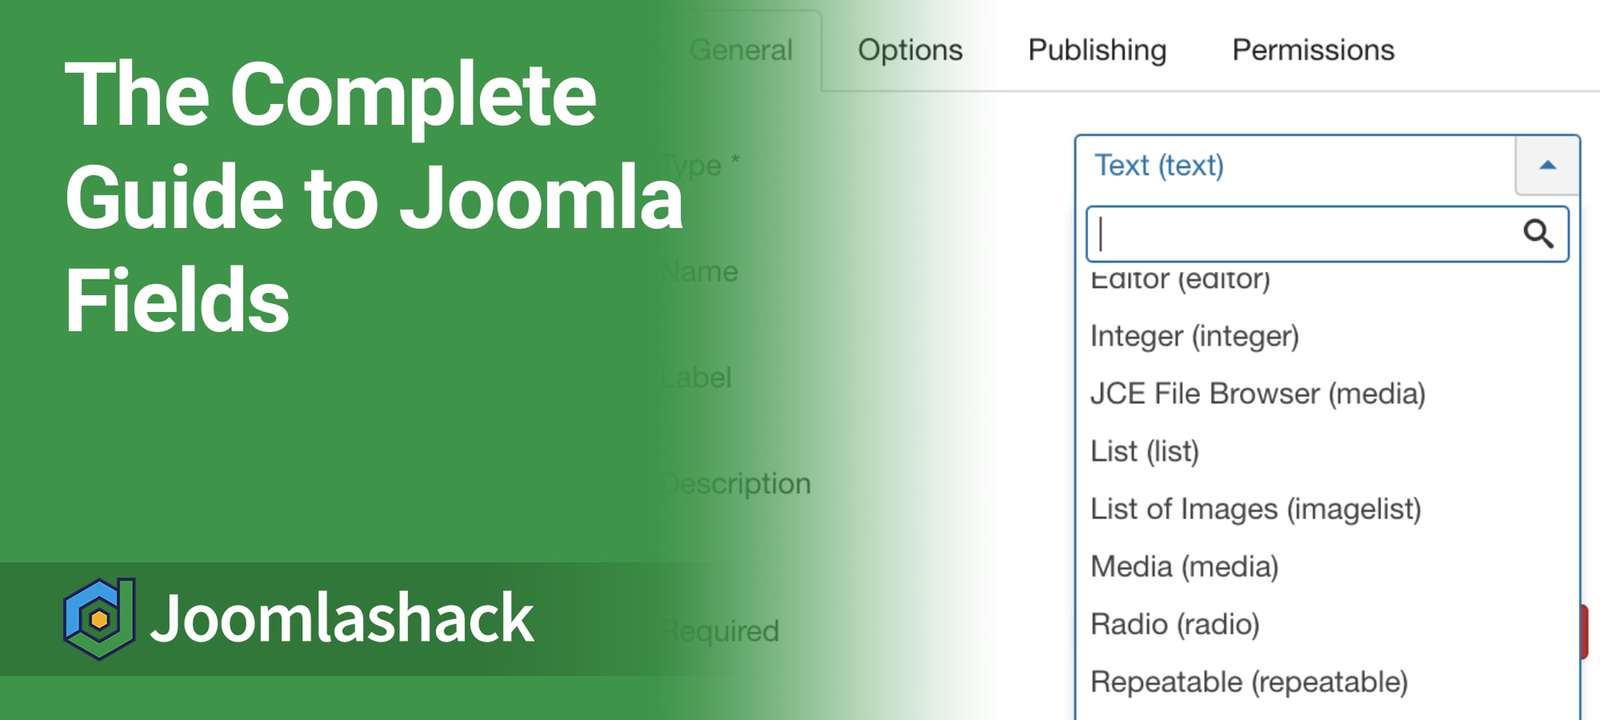 The Complete Guide to Joomla Custom Fields